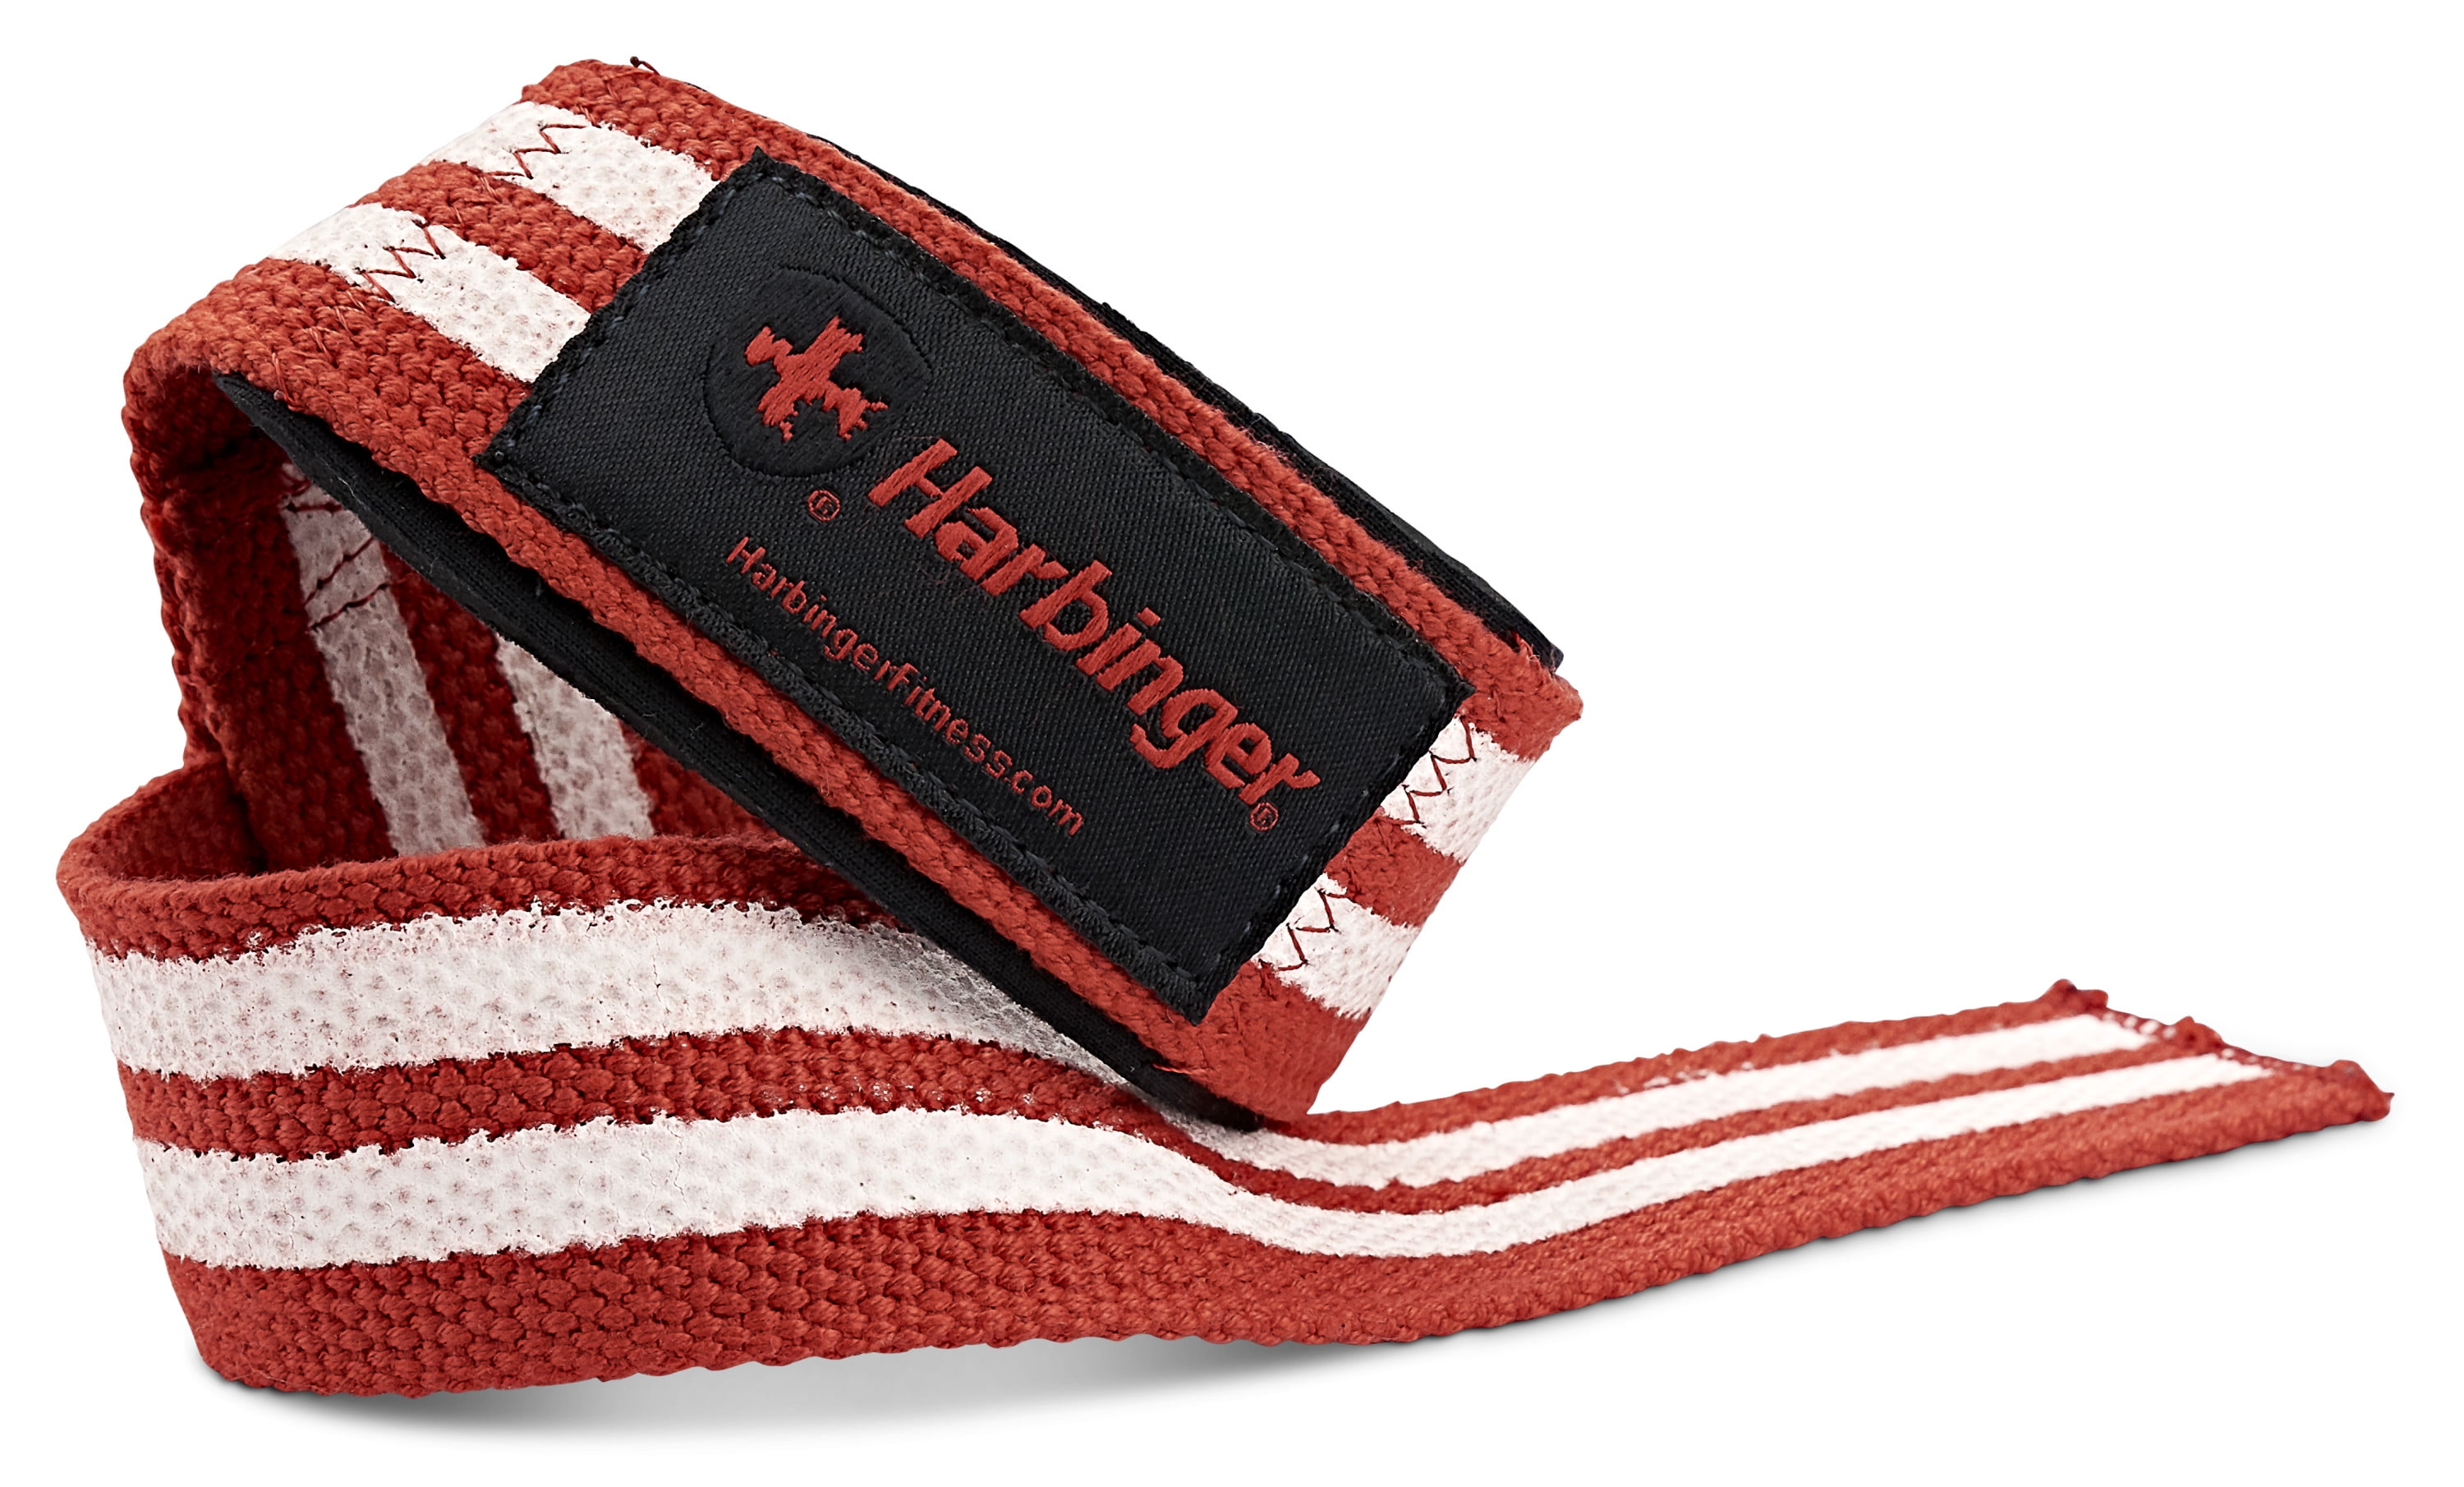 Harbinger Padded Cotton Weightlifting Support Straps Black, 21.5 